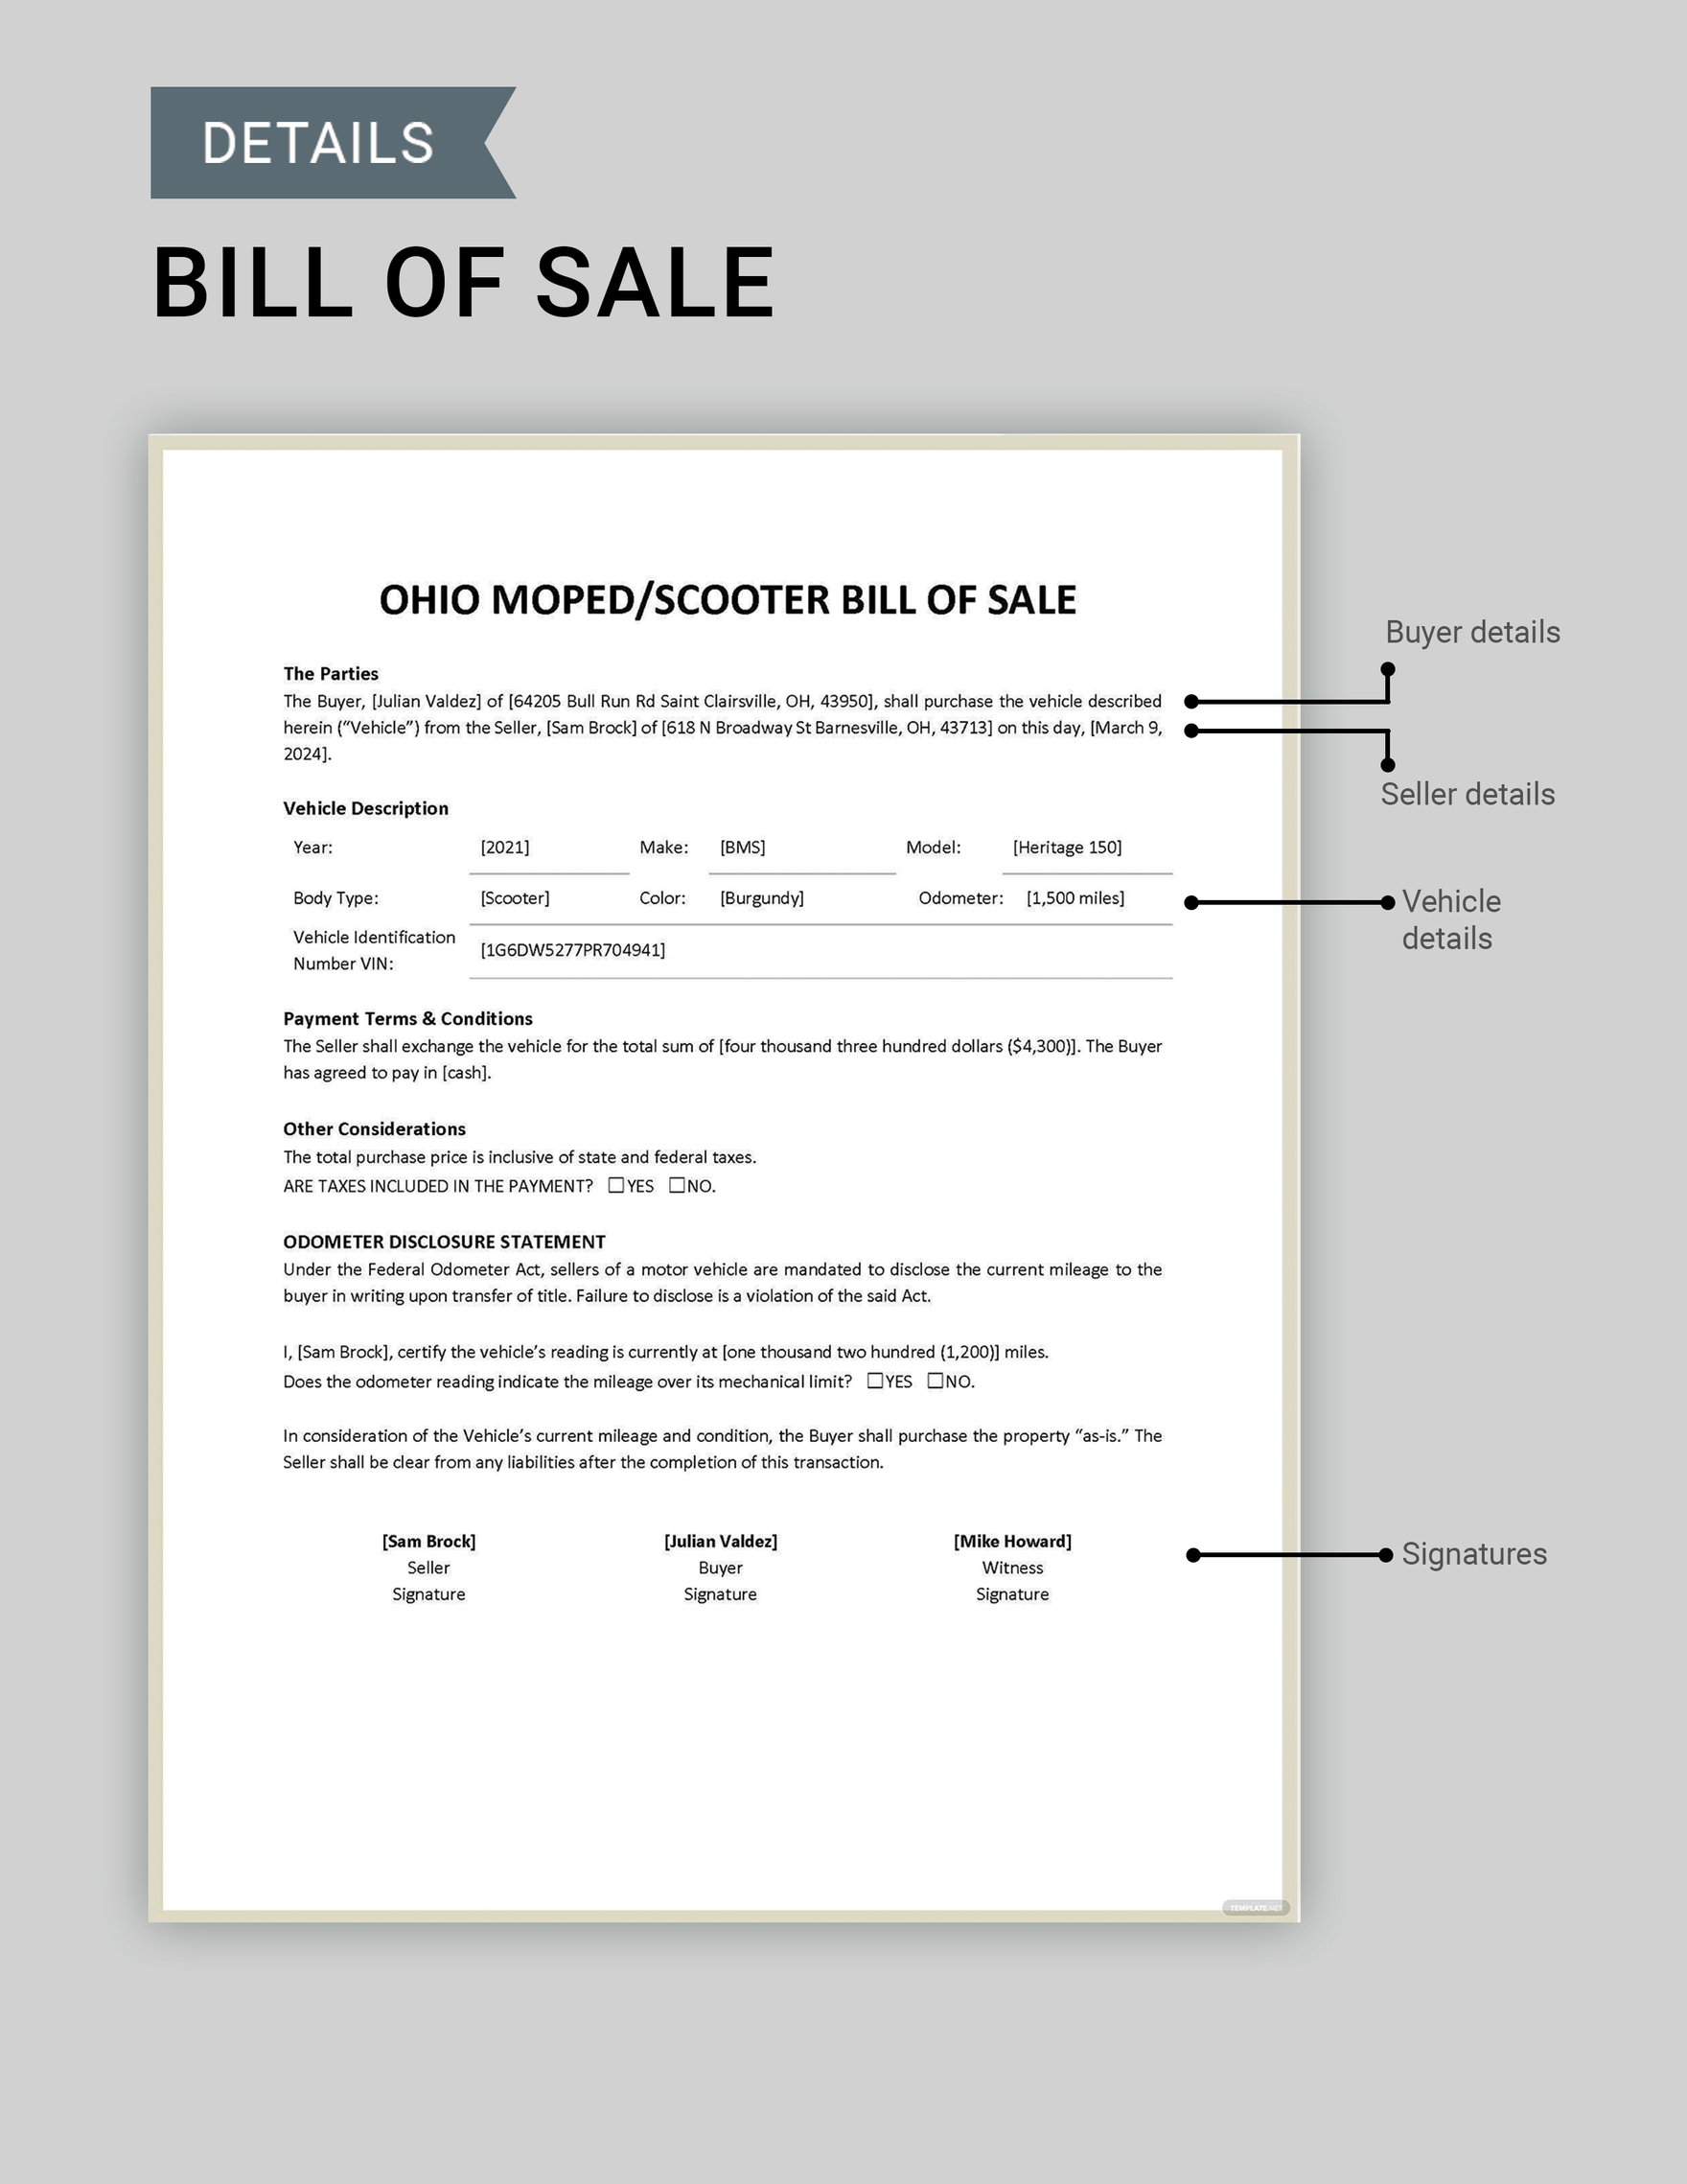 Ohio Moped / Scooter Bill of Sale Template